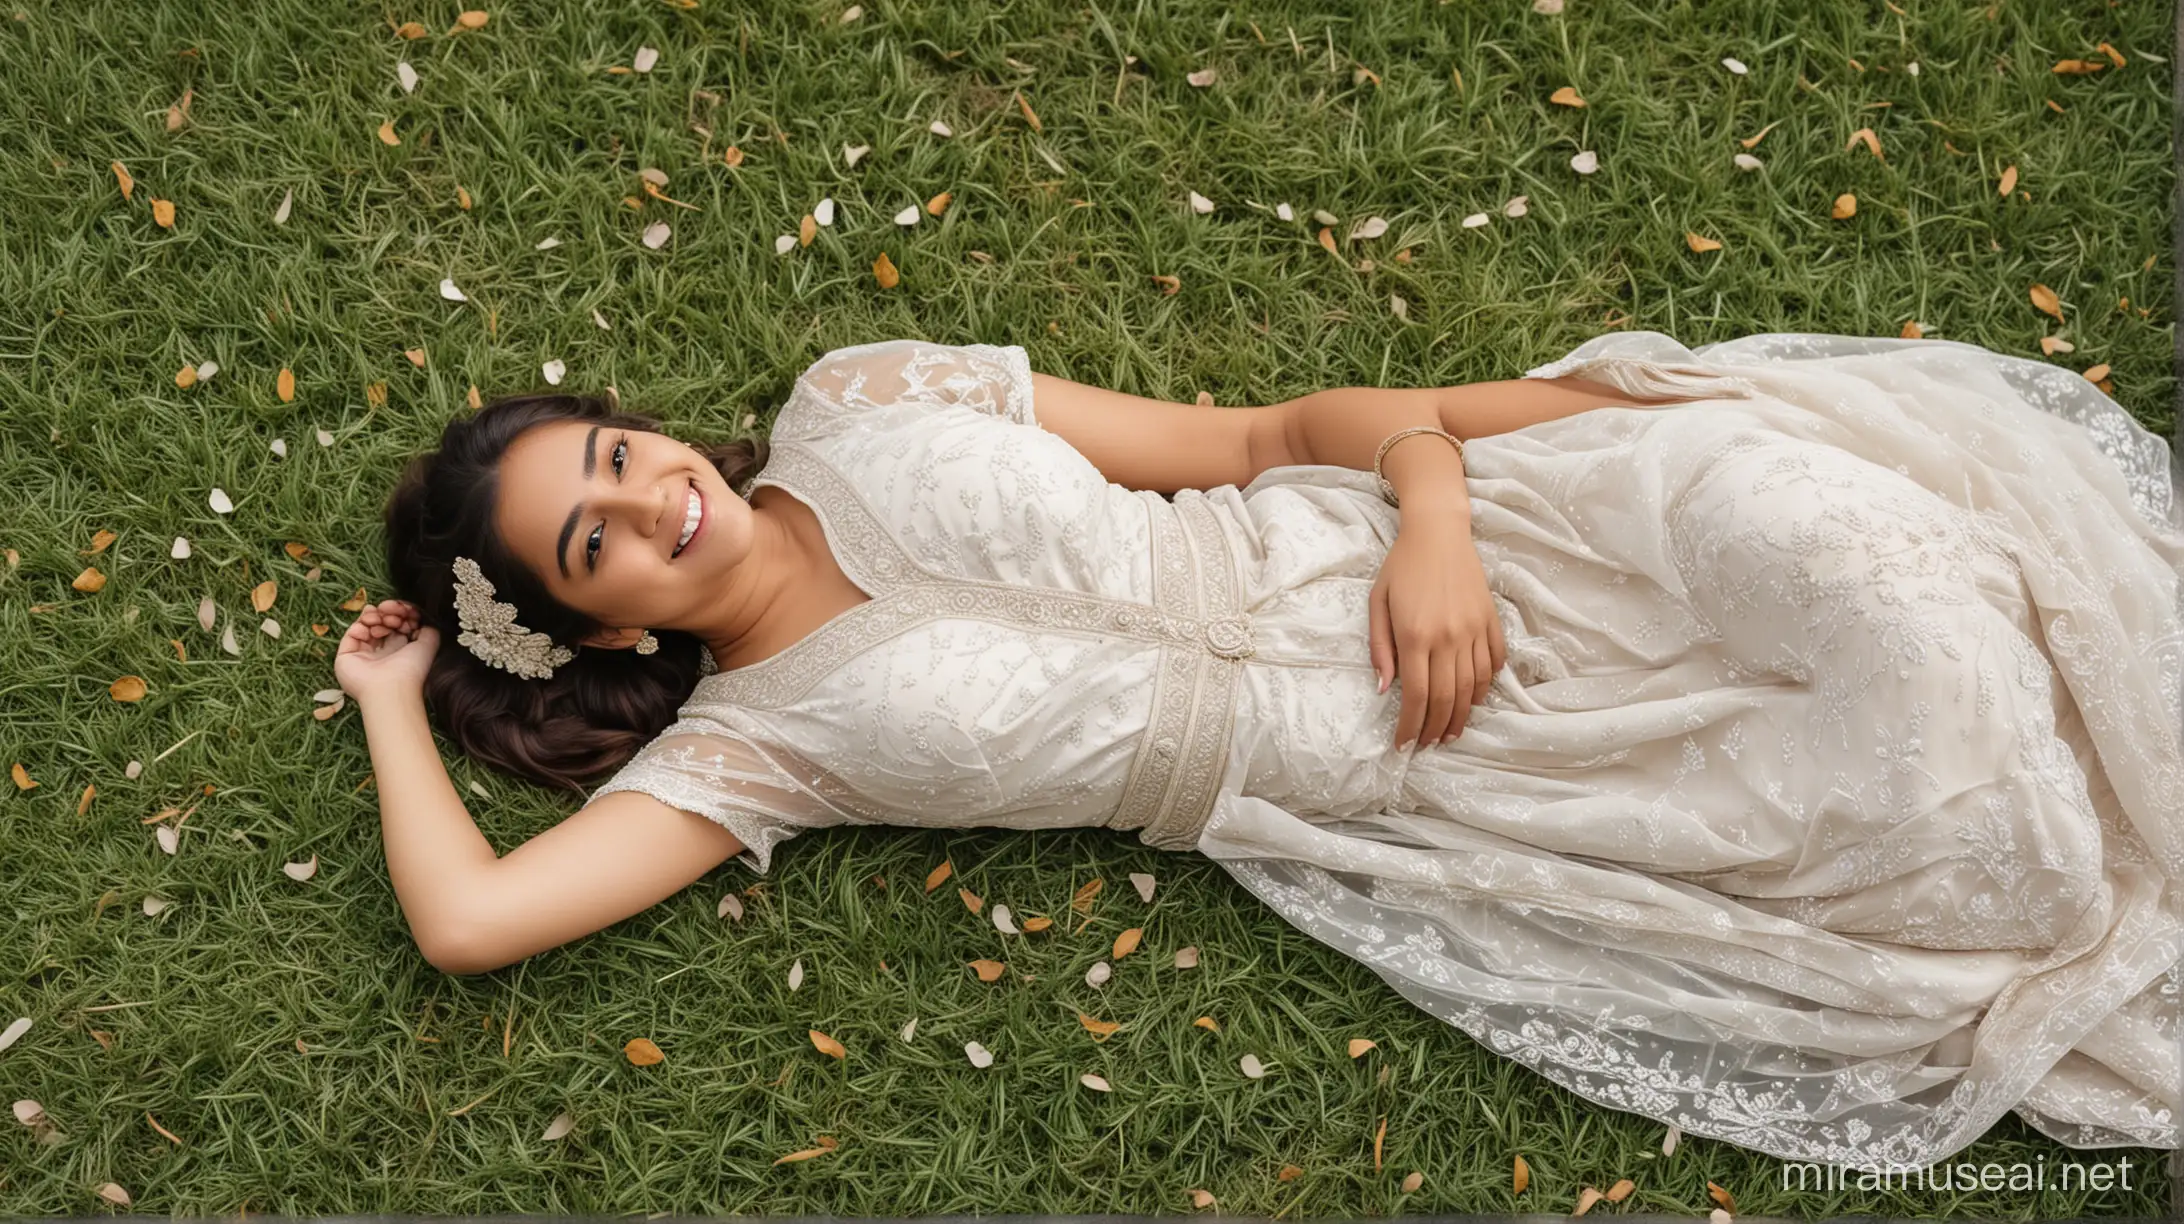 Radiant Young Woman in Reem Sameer ShaikhInspired Bridal Attire Graciously Resting on Meadow with a Joyful Smile